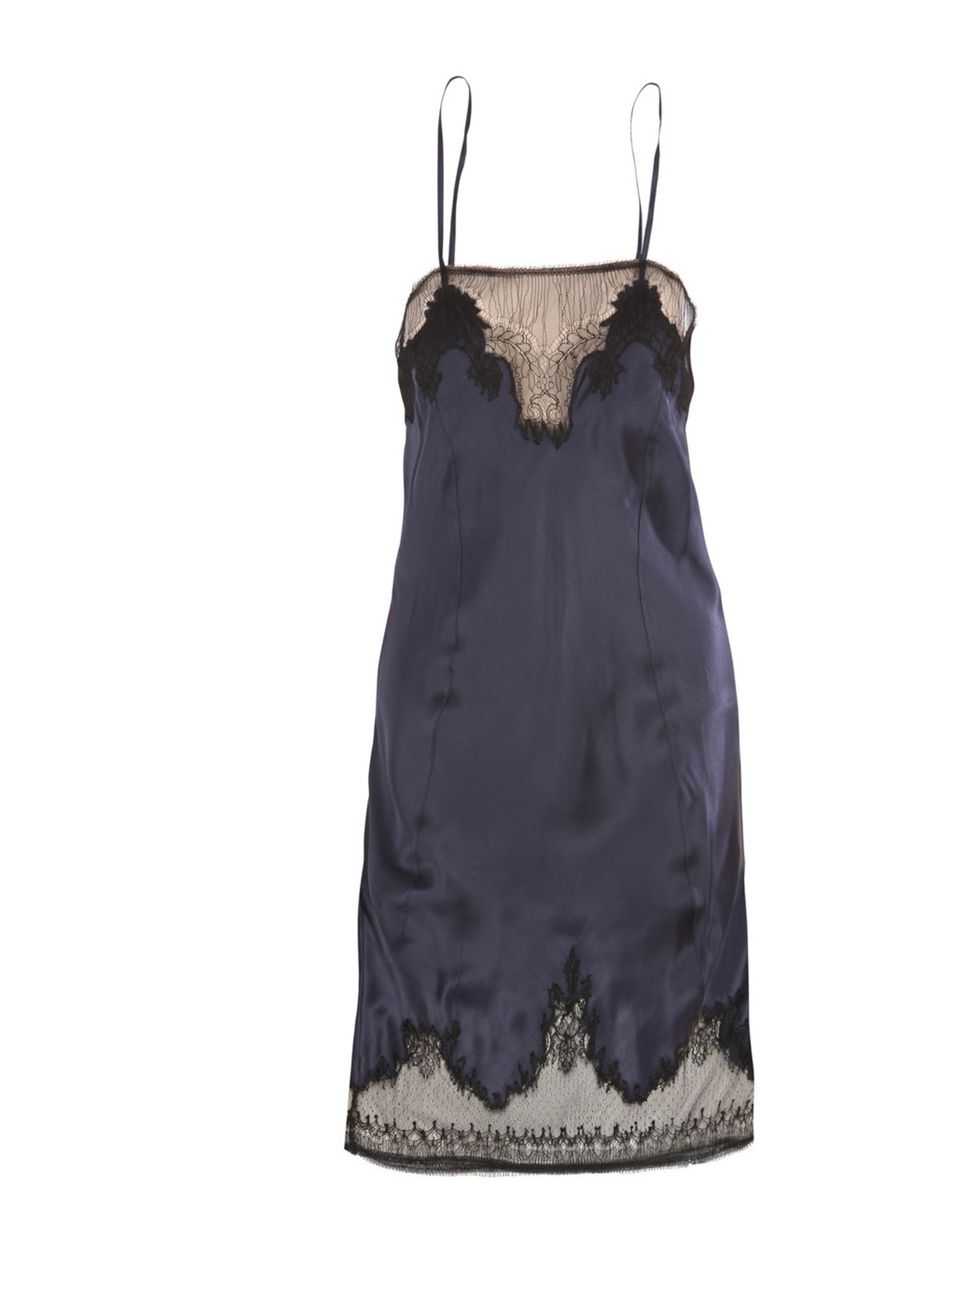 <p>Clare Tough silk slip, £105 (was £525), at <a href="http://www.matchesfashion.com/product/101994">Matches Fashion</a></p>